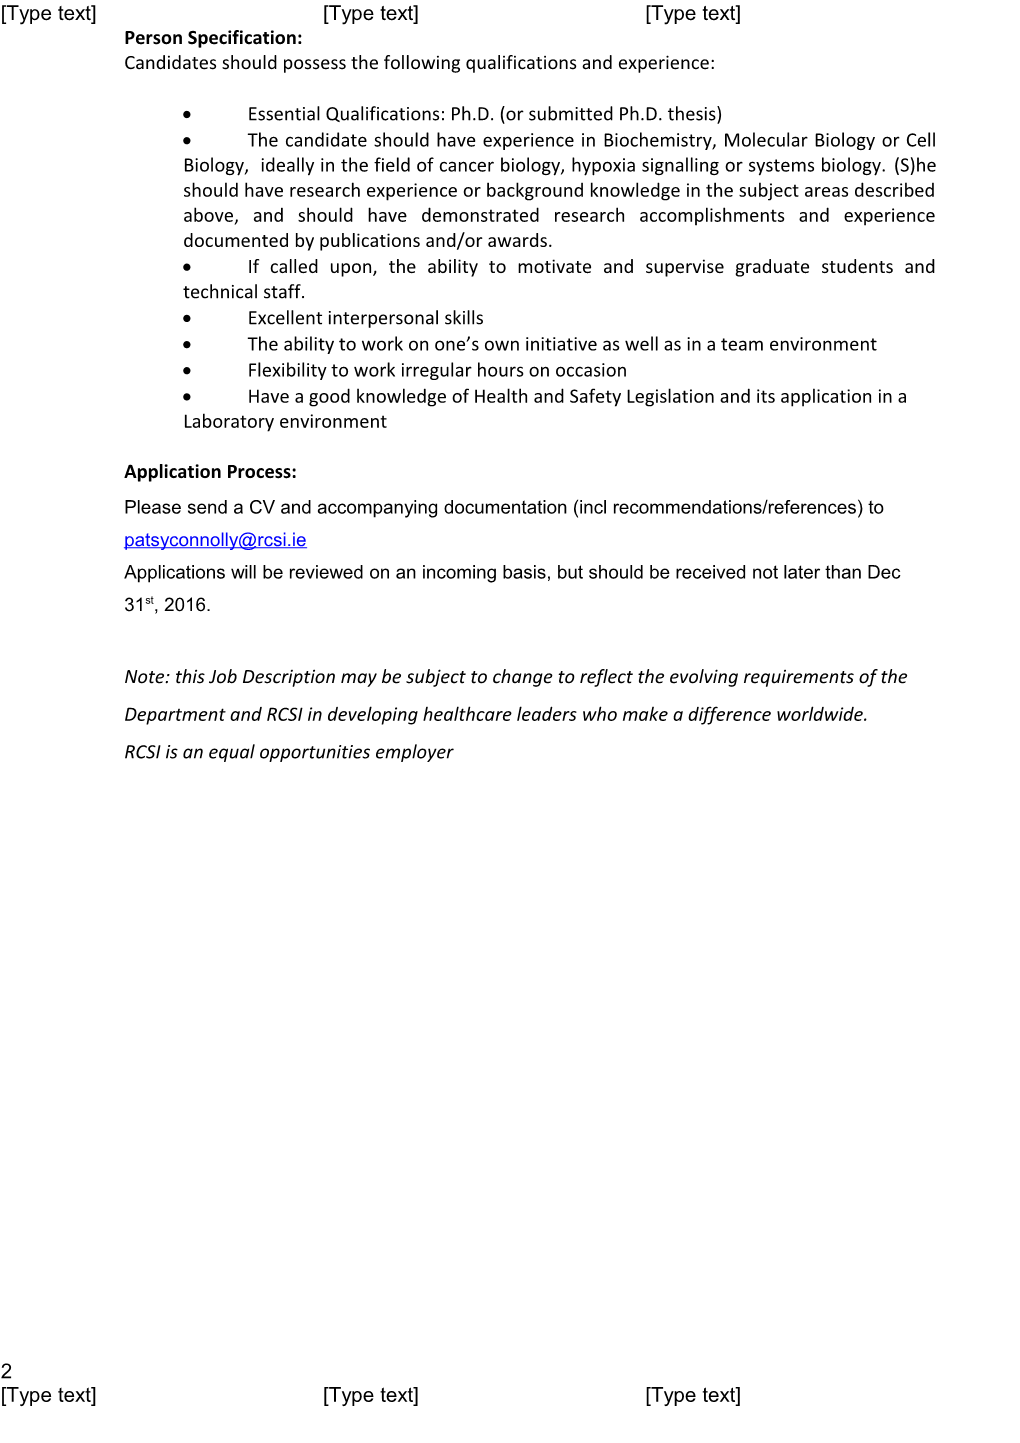 Title:Postdoctoral Position in Hypoxia Signalling and Cancer Biology